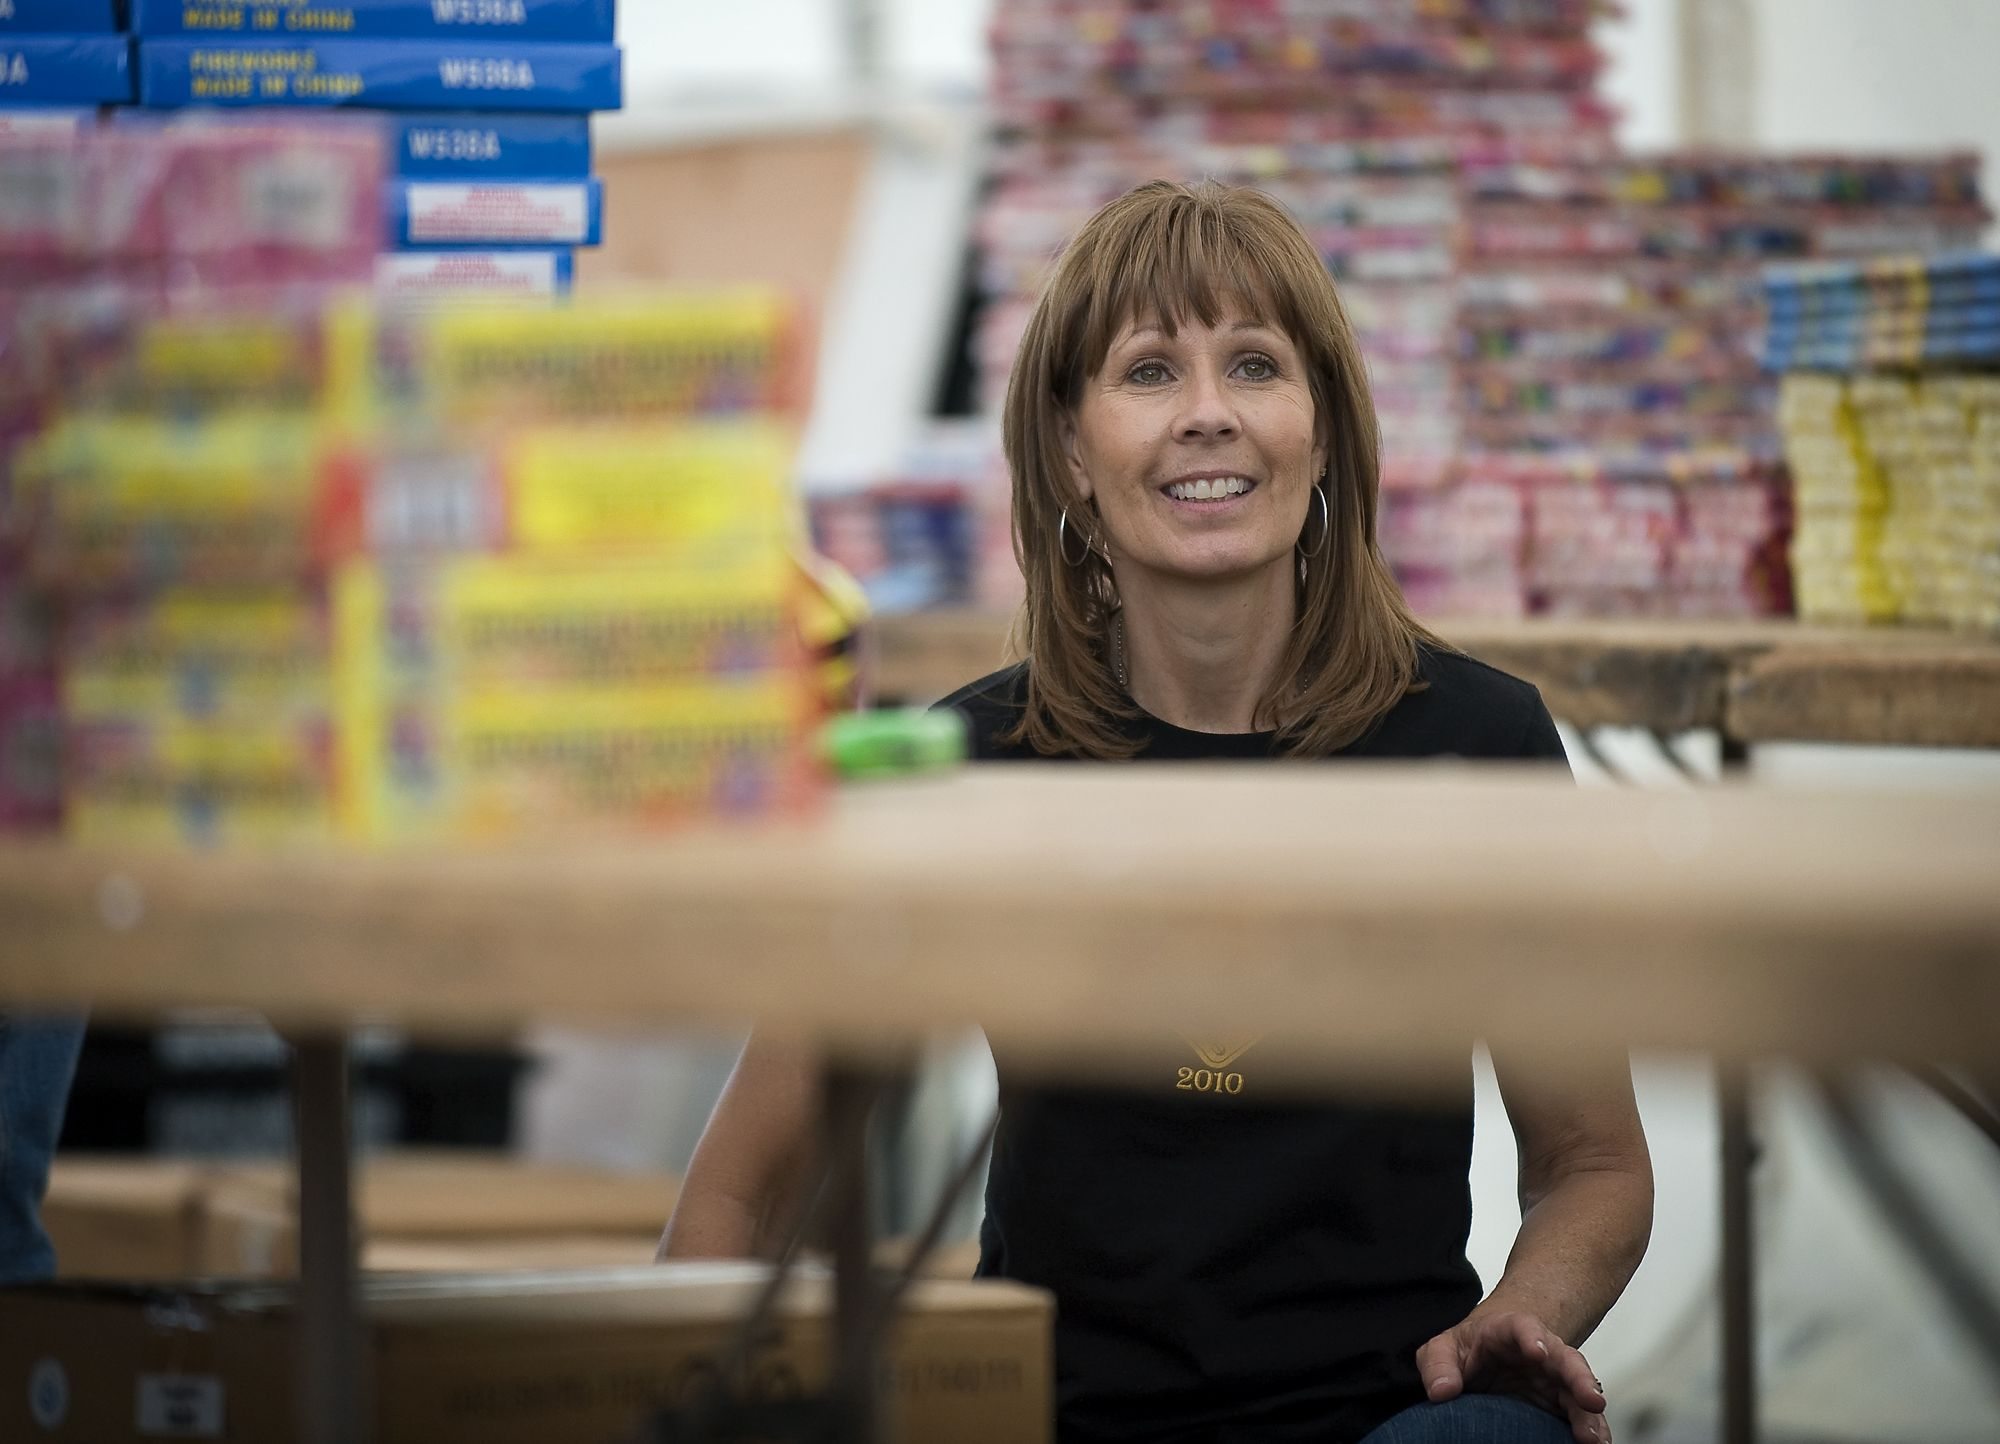 Colleen Czaplicki, of Cave Creek, Ariz., whose son Sgt. John Kyle Daggett was killed in 2008, stocks the shelves Monday at a fundraising fireworks stand at 2711 N.E.